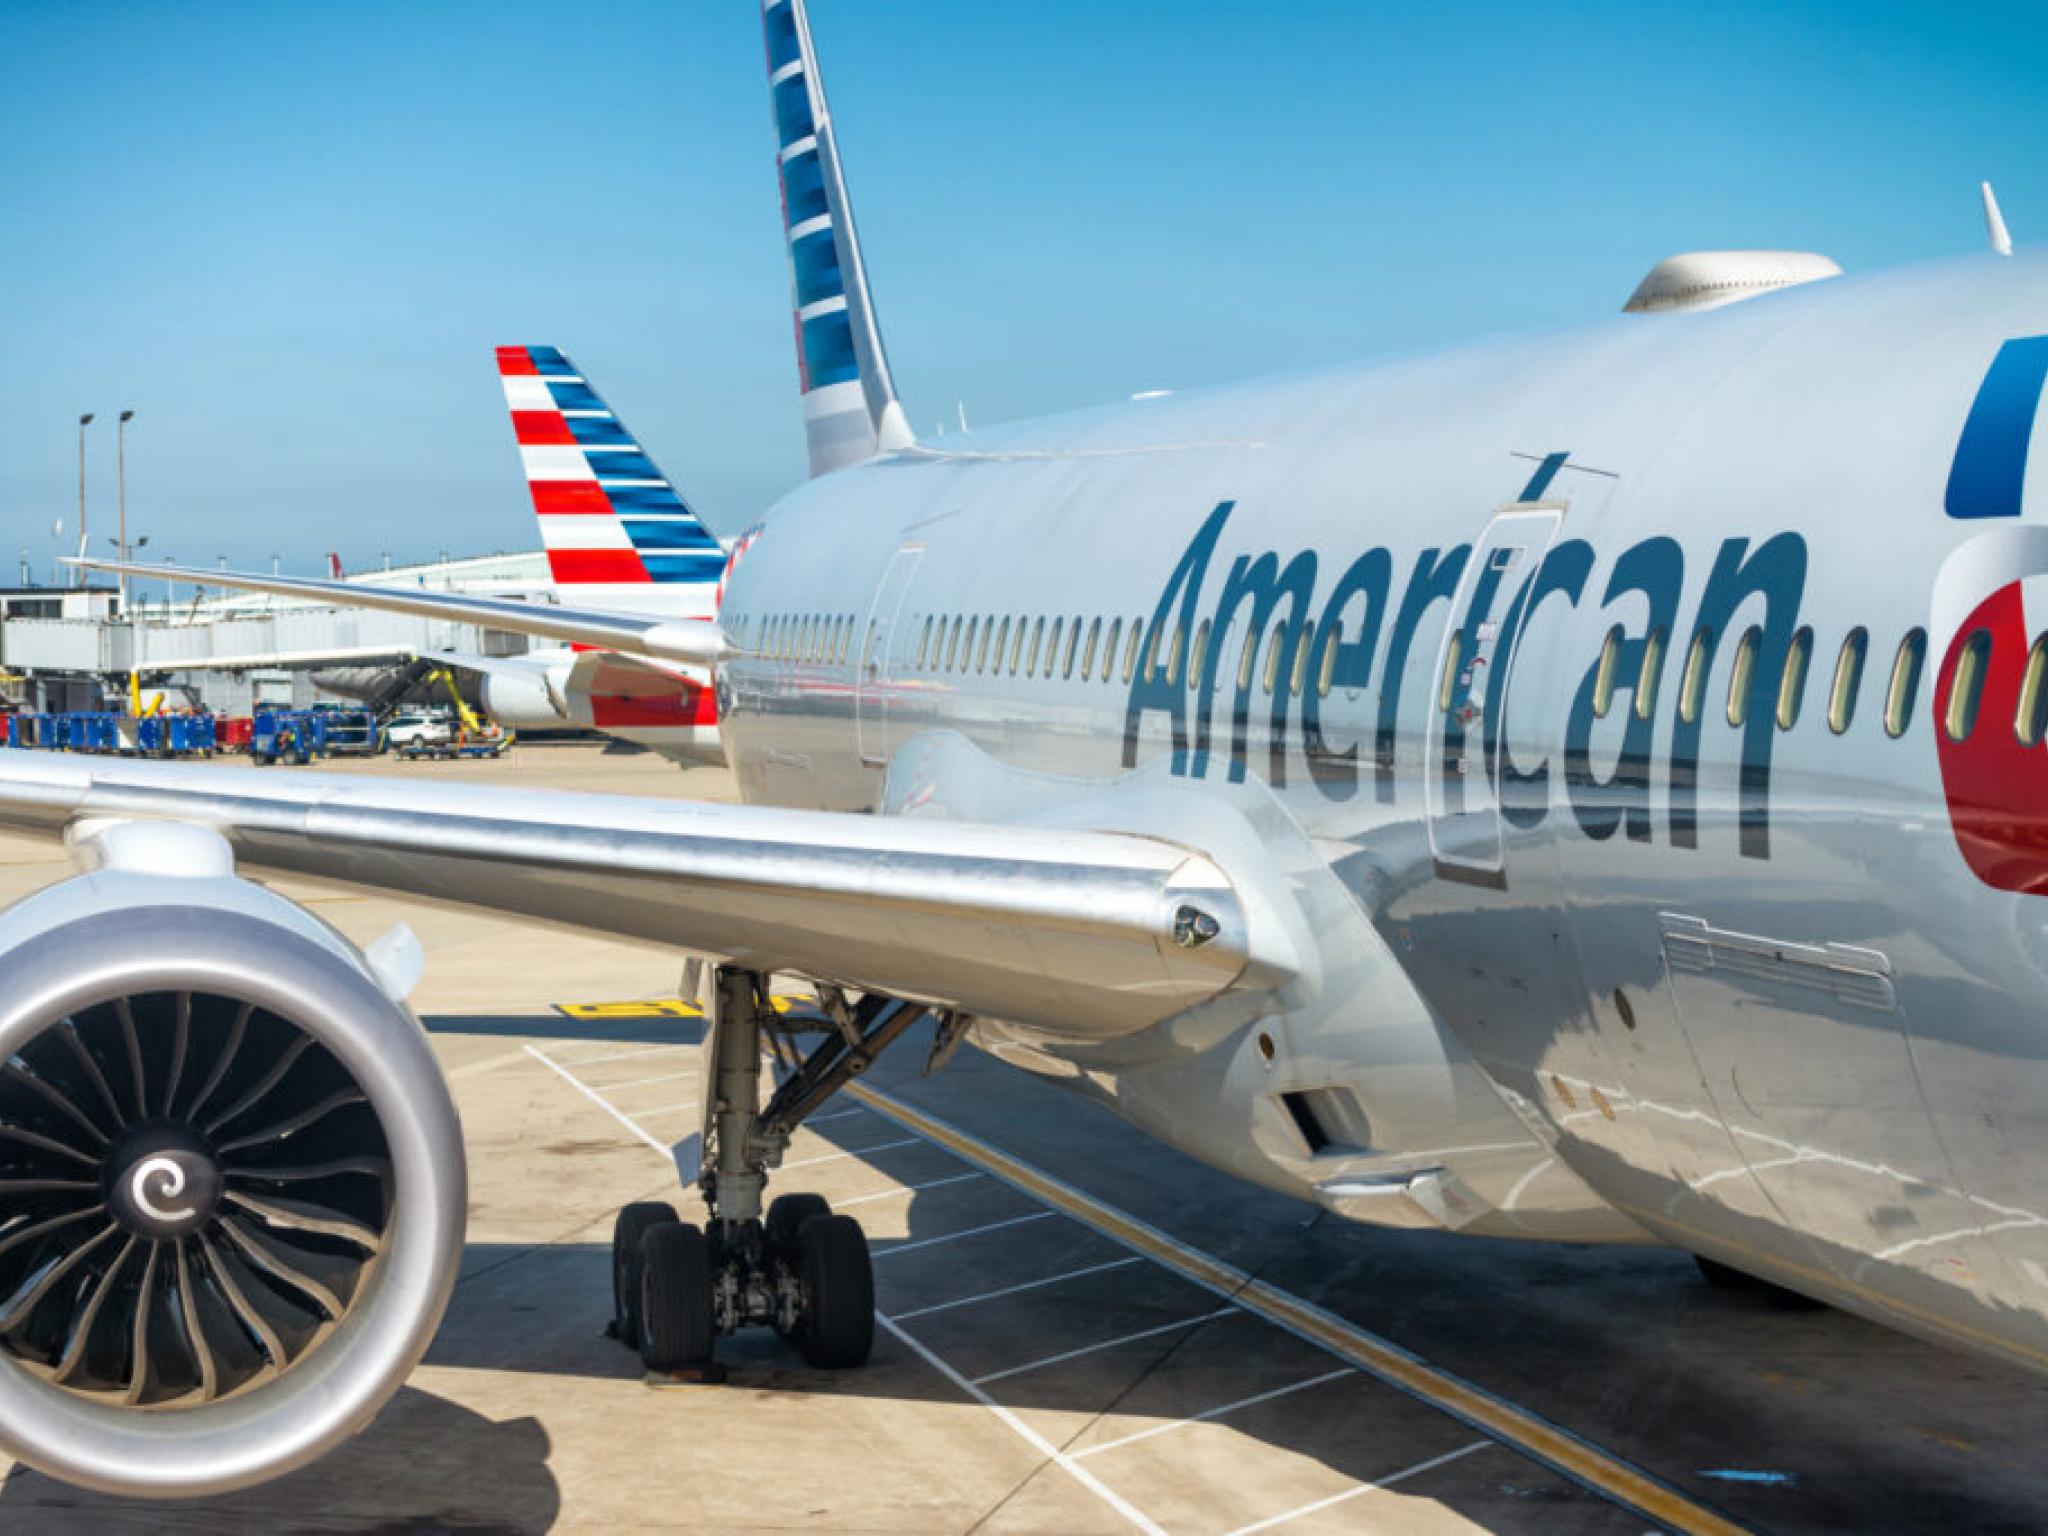  american-airlines-to-rally-around-59-here-are-10-top-analyst-forecasts-for-monday 